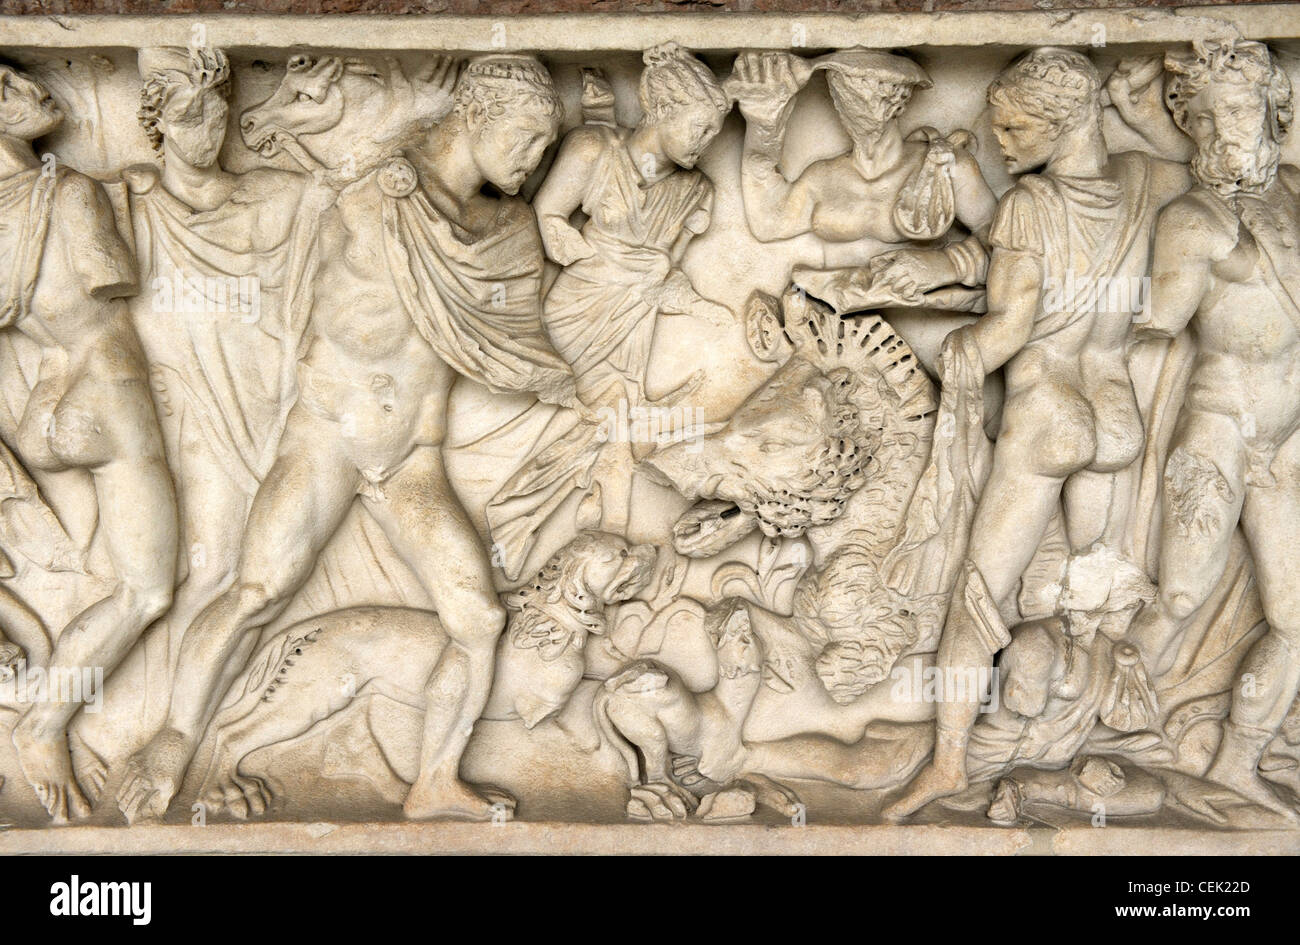 Roman period carved stone relief sarcophagus panel inside the Camposanto Monumentale cemetery. Pisa, Tuscany, Italy. Boar hunt Stock Photo